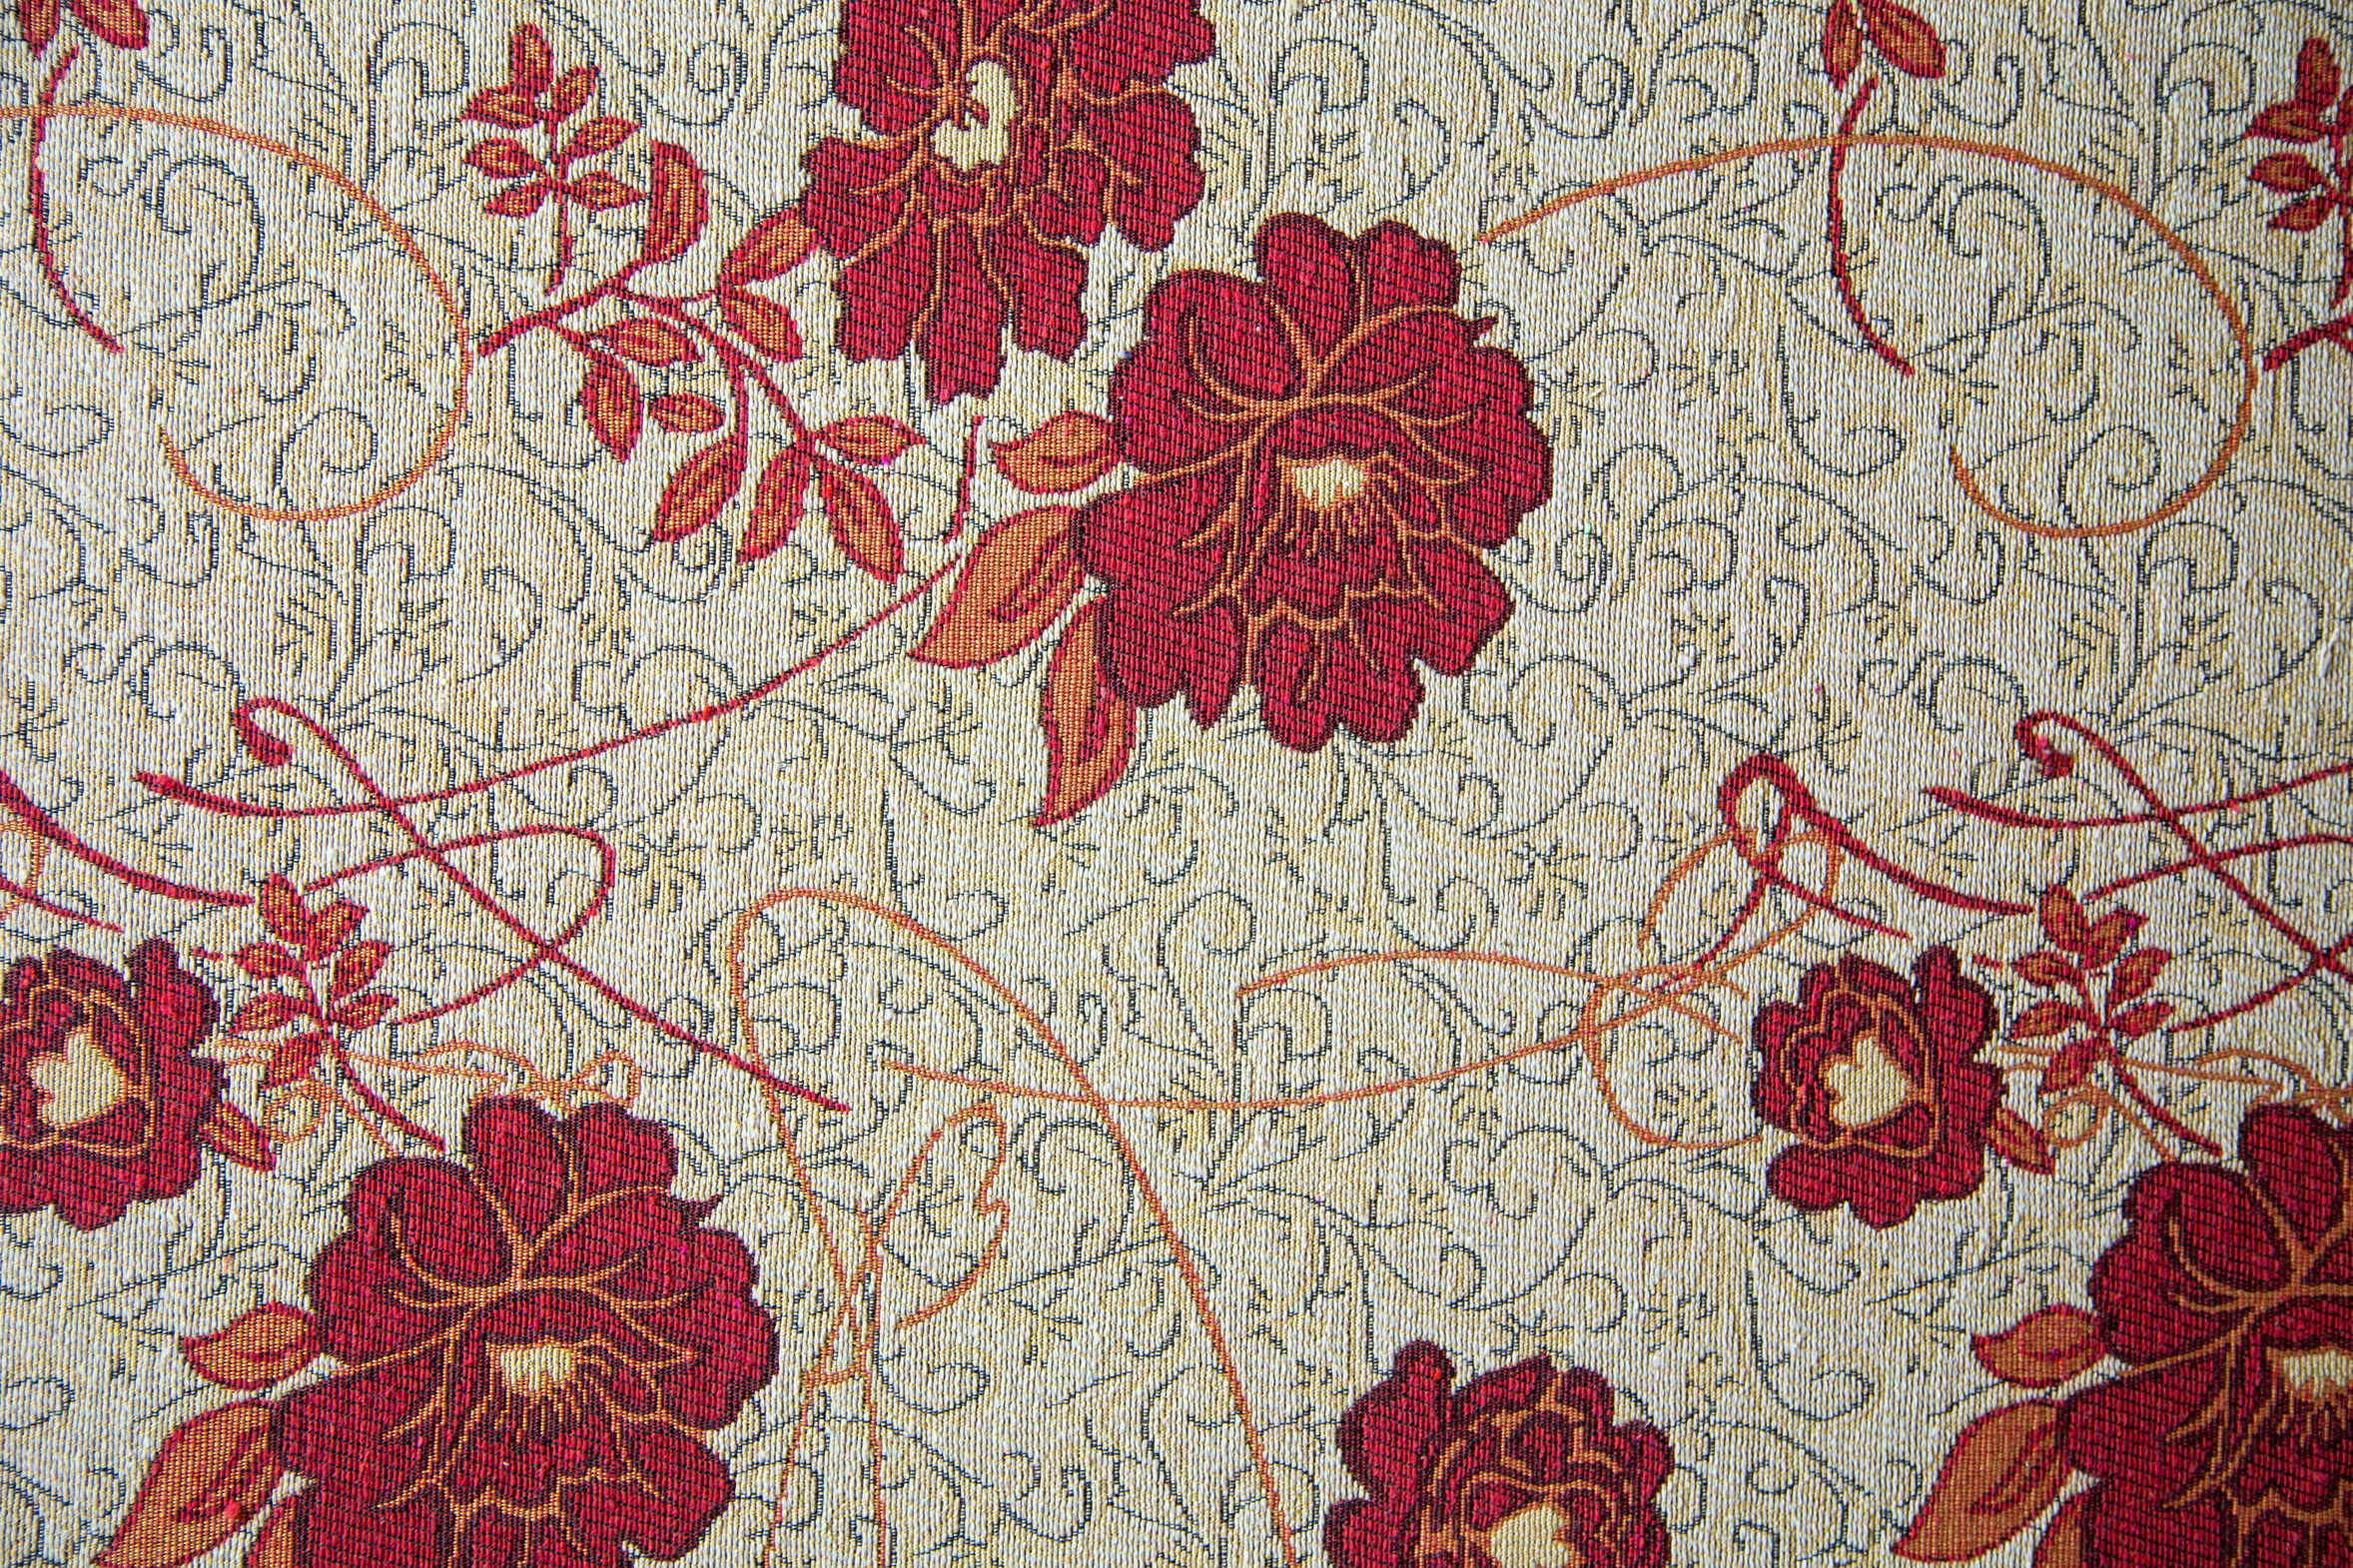 Vintage luxury flower fabric upholstery, texture background